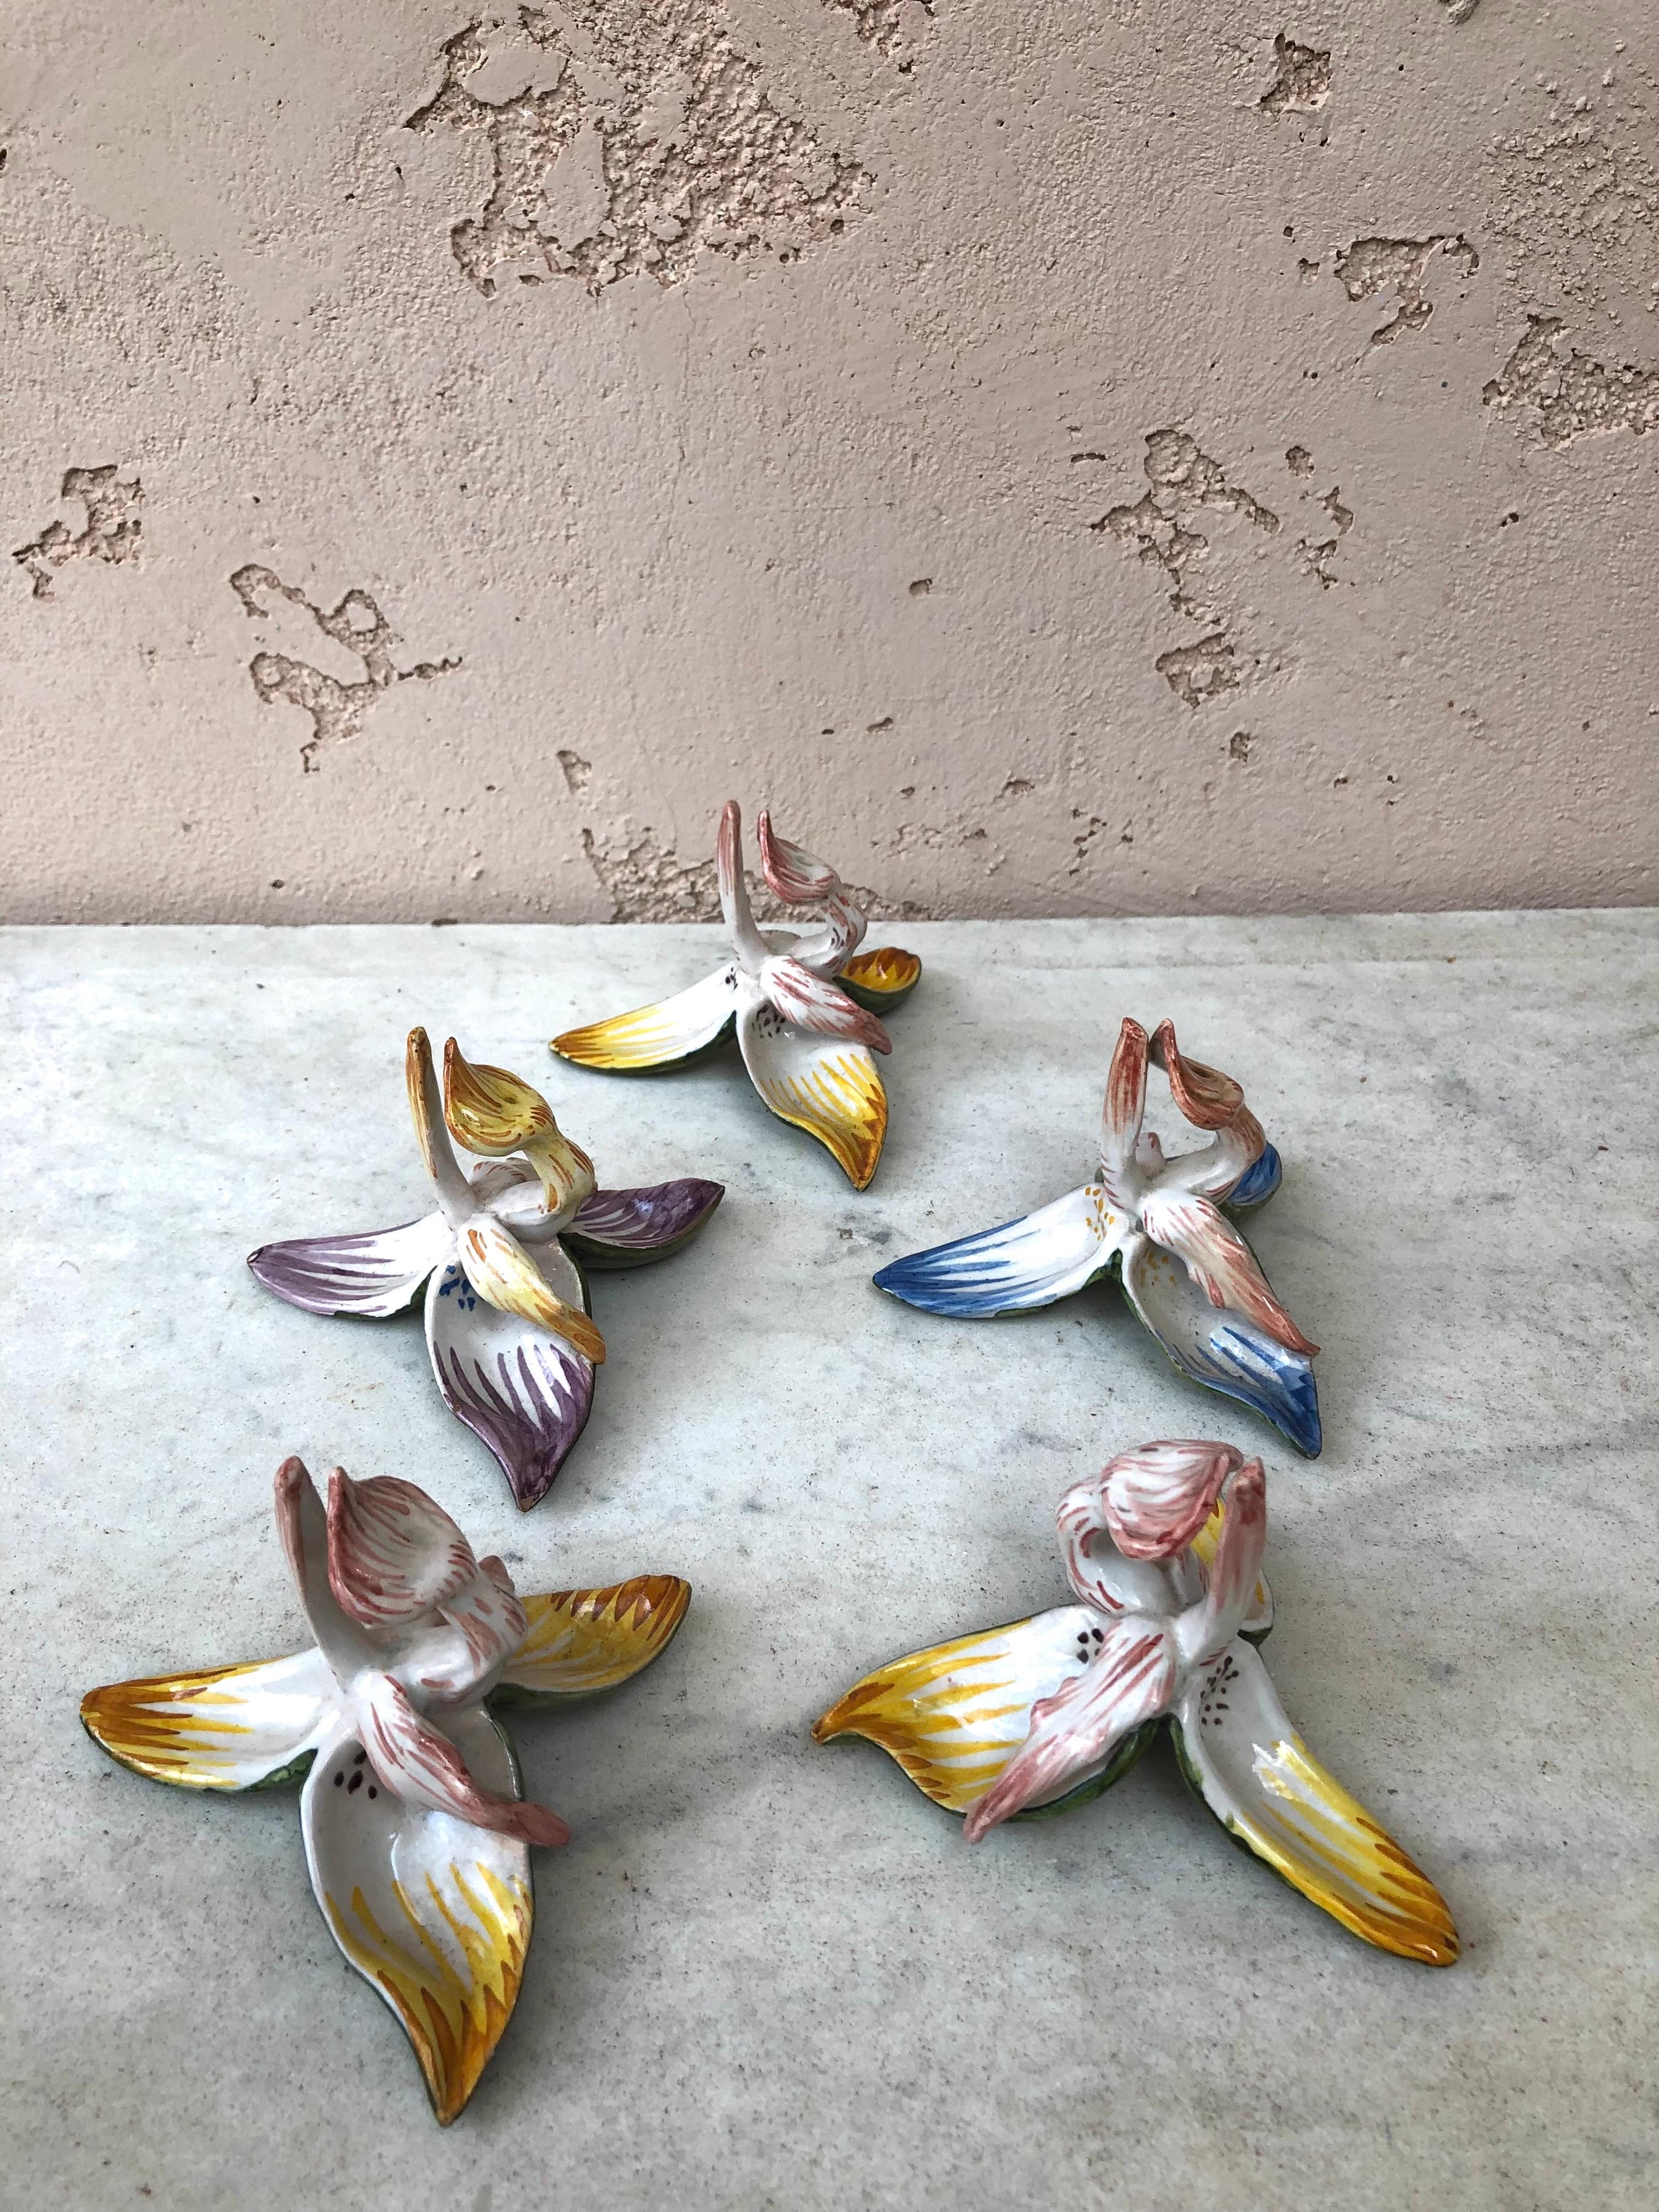 Very rare Set of 5 French Faience orchid place holders circa 1900.
Attributed to Saint Clement.